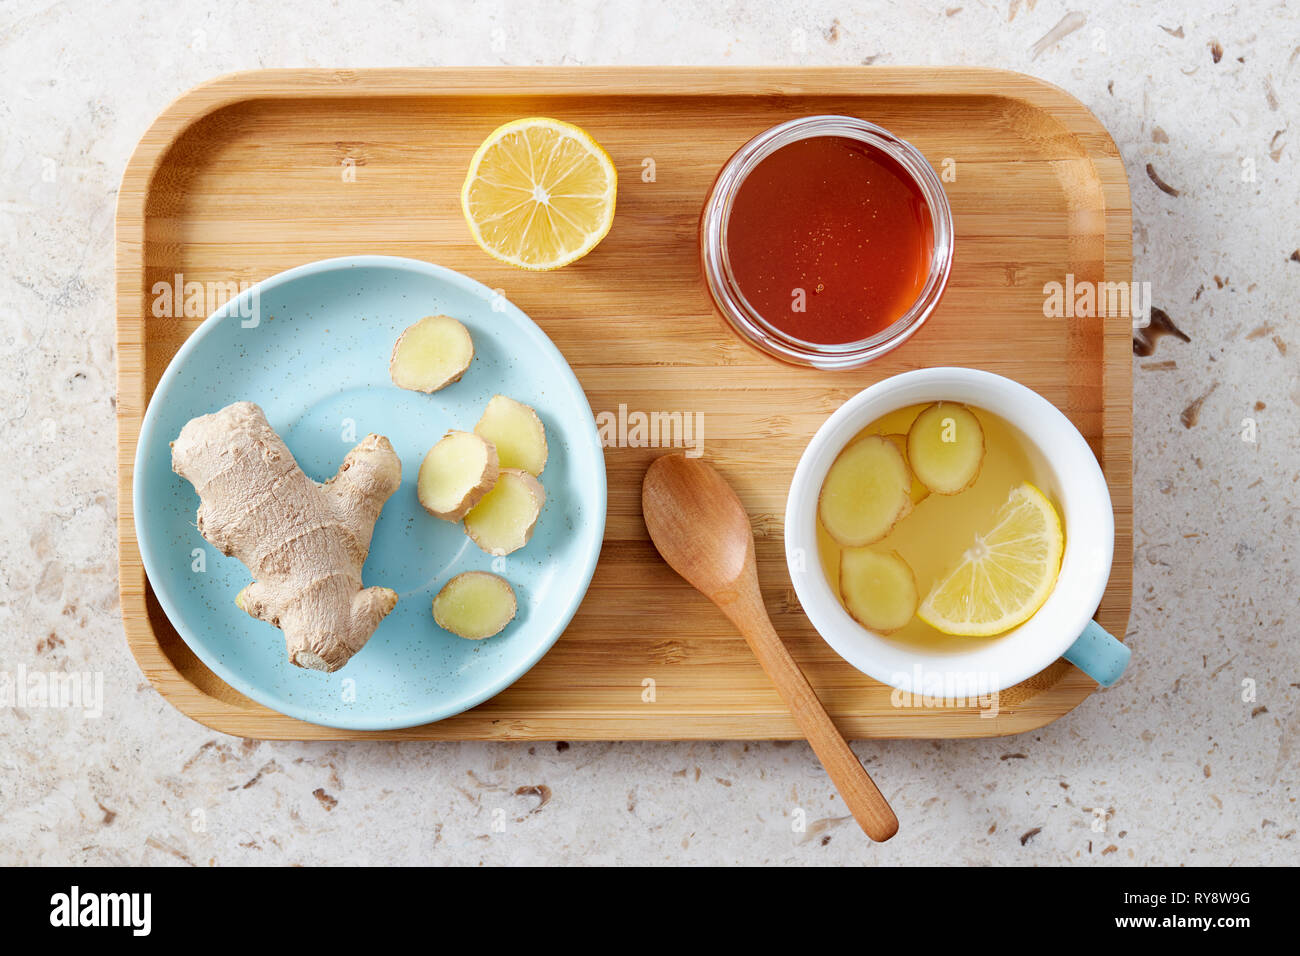 Lemon and ginger tea with honey. Wooden tray of honey lemon tea with fresh ginger root. Stock Photo